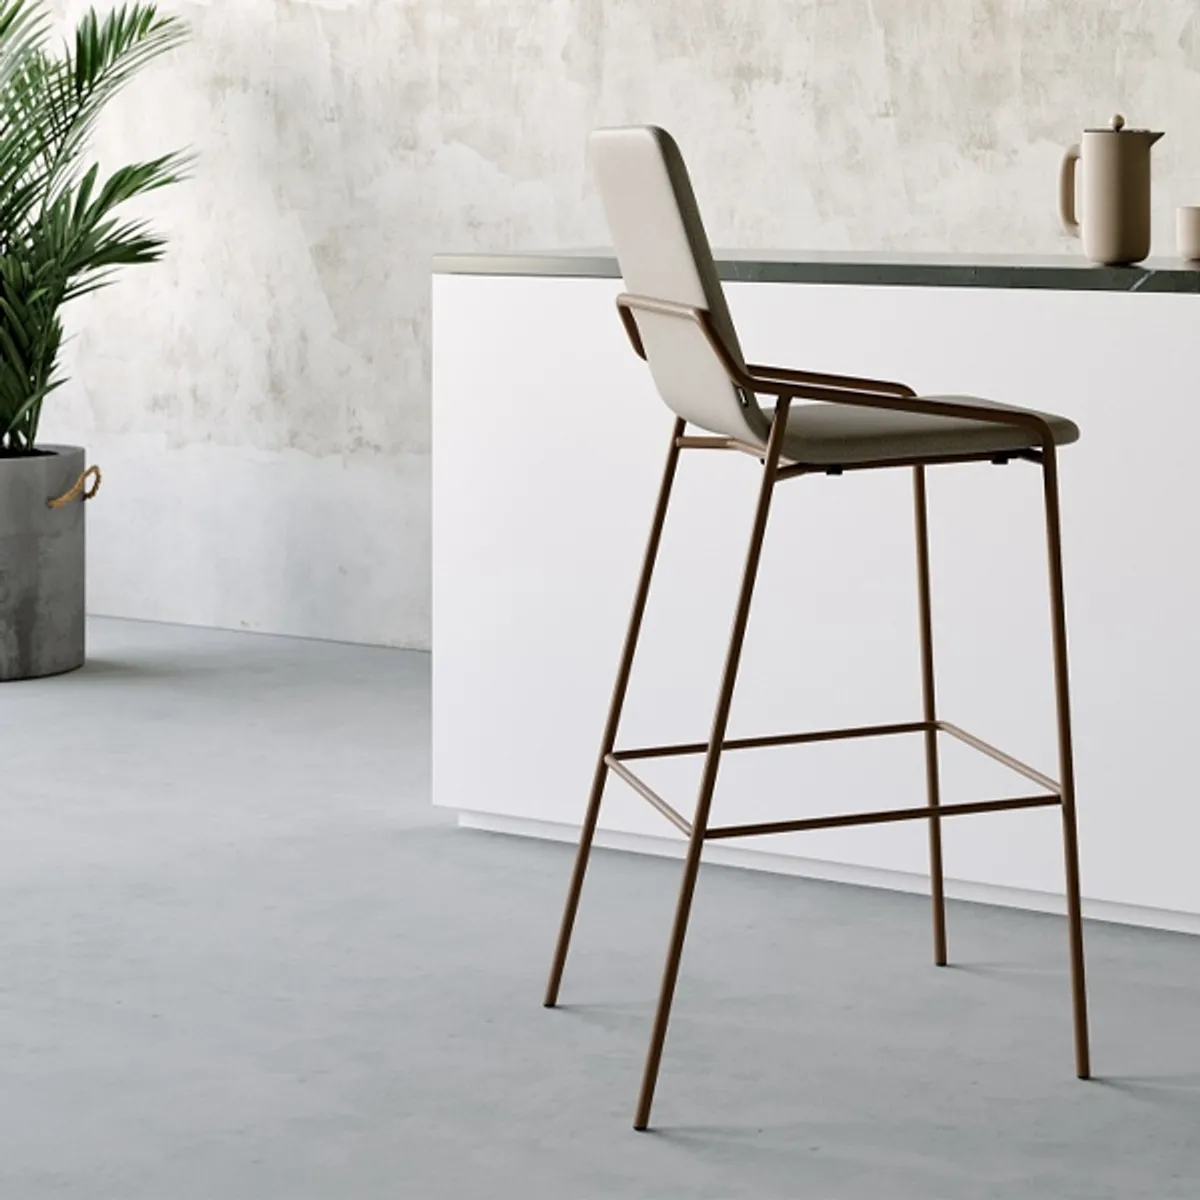 Hestia soft bar stool Inside Out Contracts6